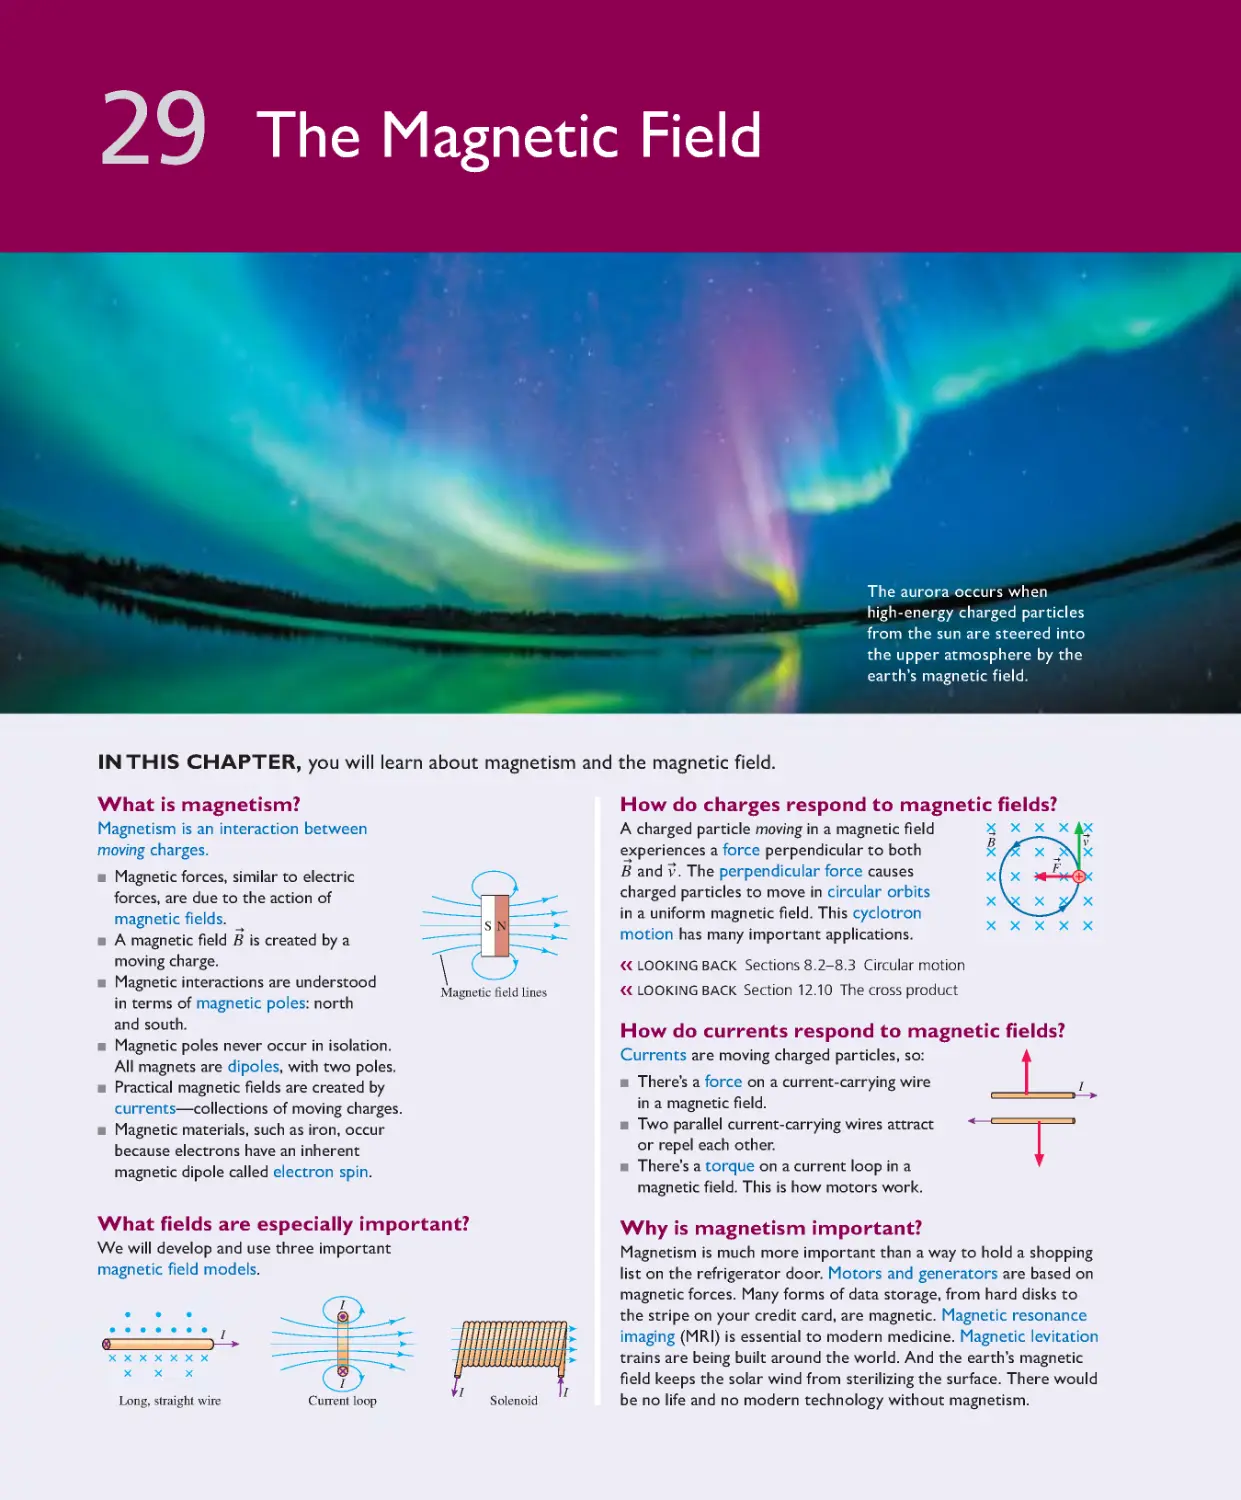 Chapter 29: The Magnetic Field